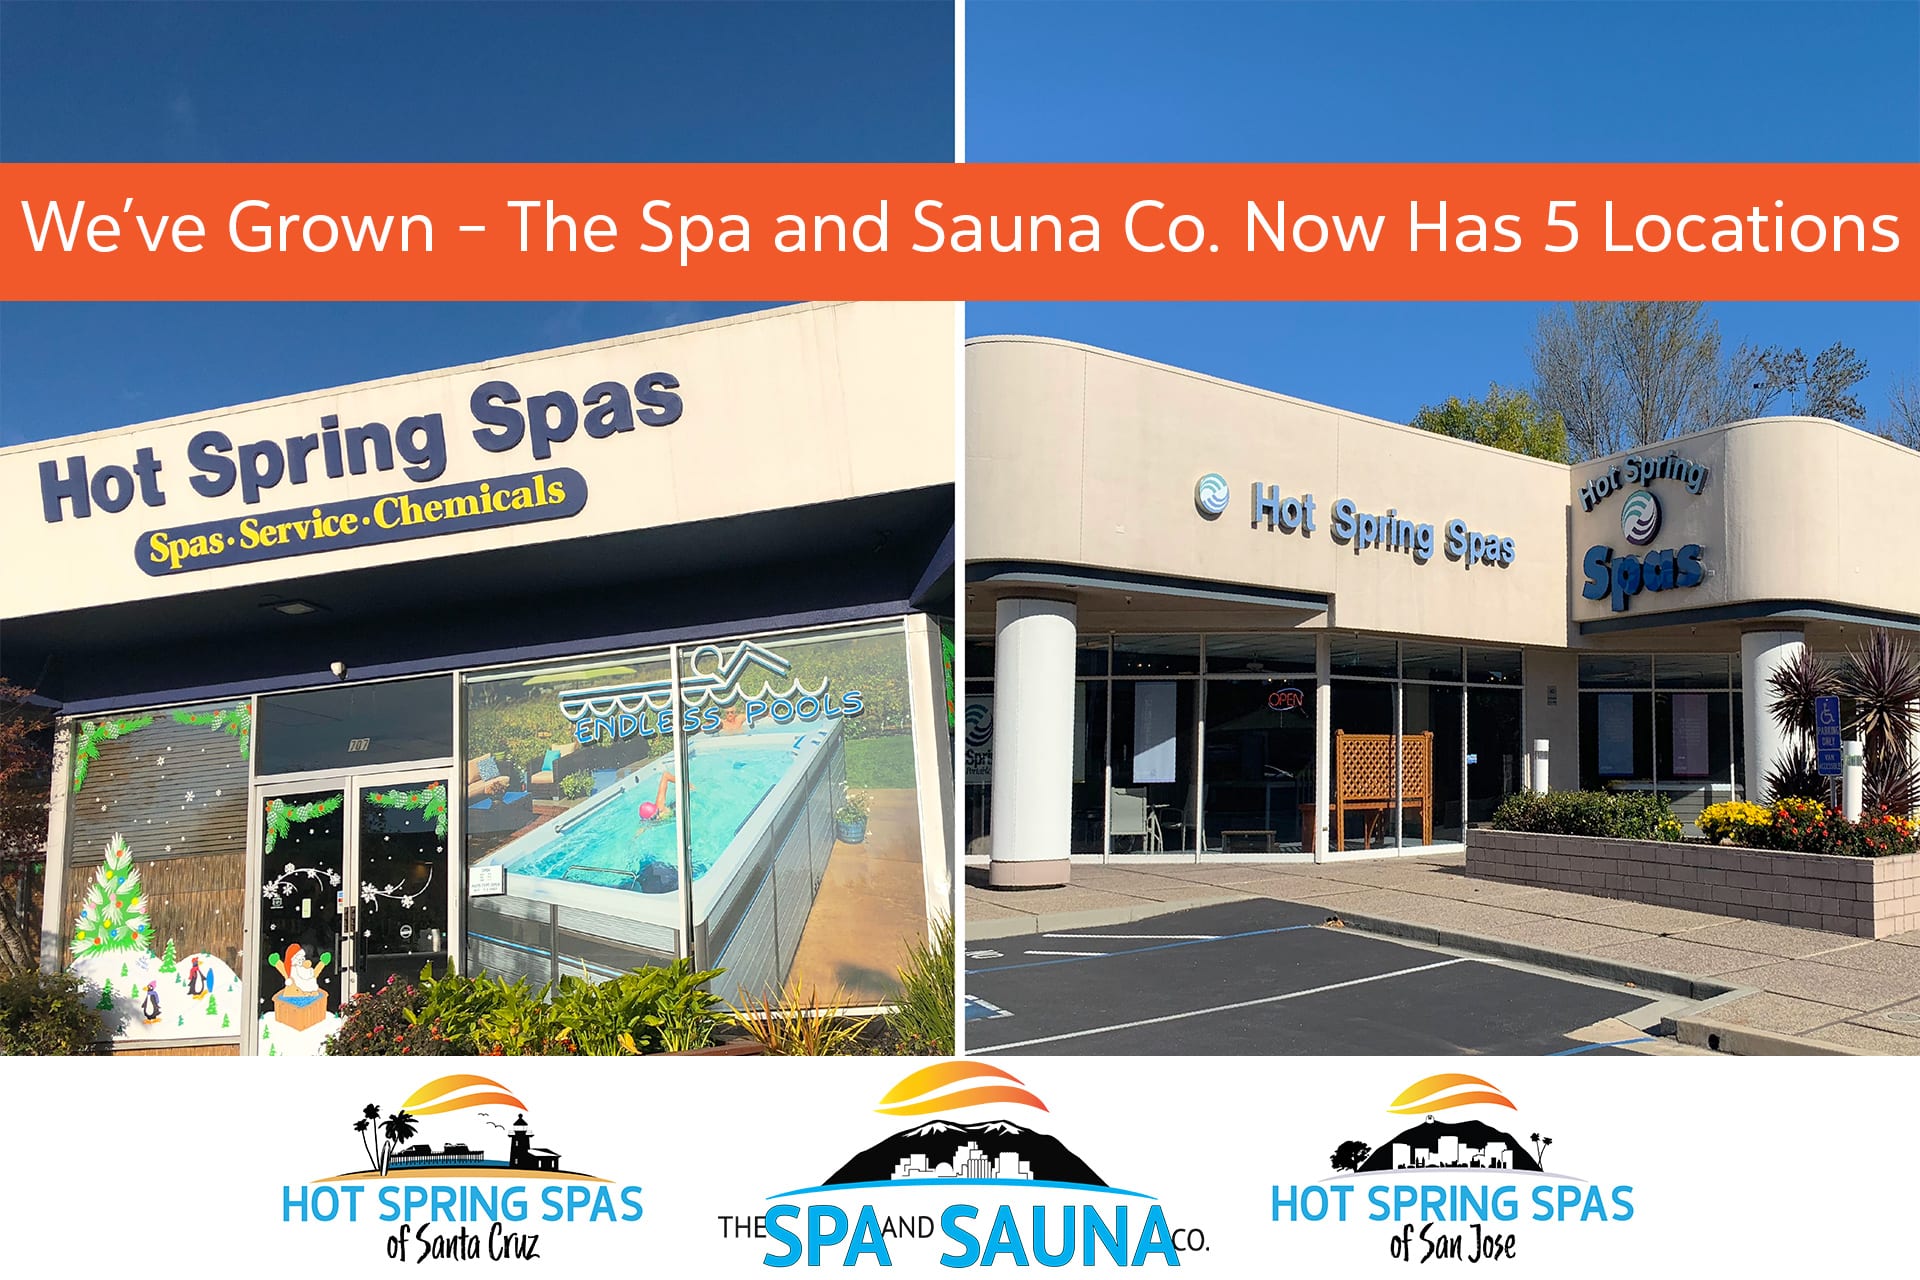 We’ve Grown – The Spa and Sauna Co. now has many locations in Nevada and California